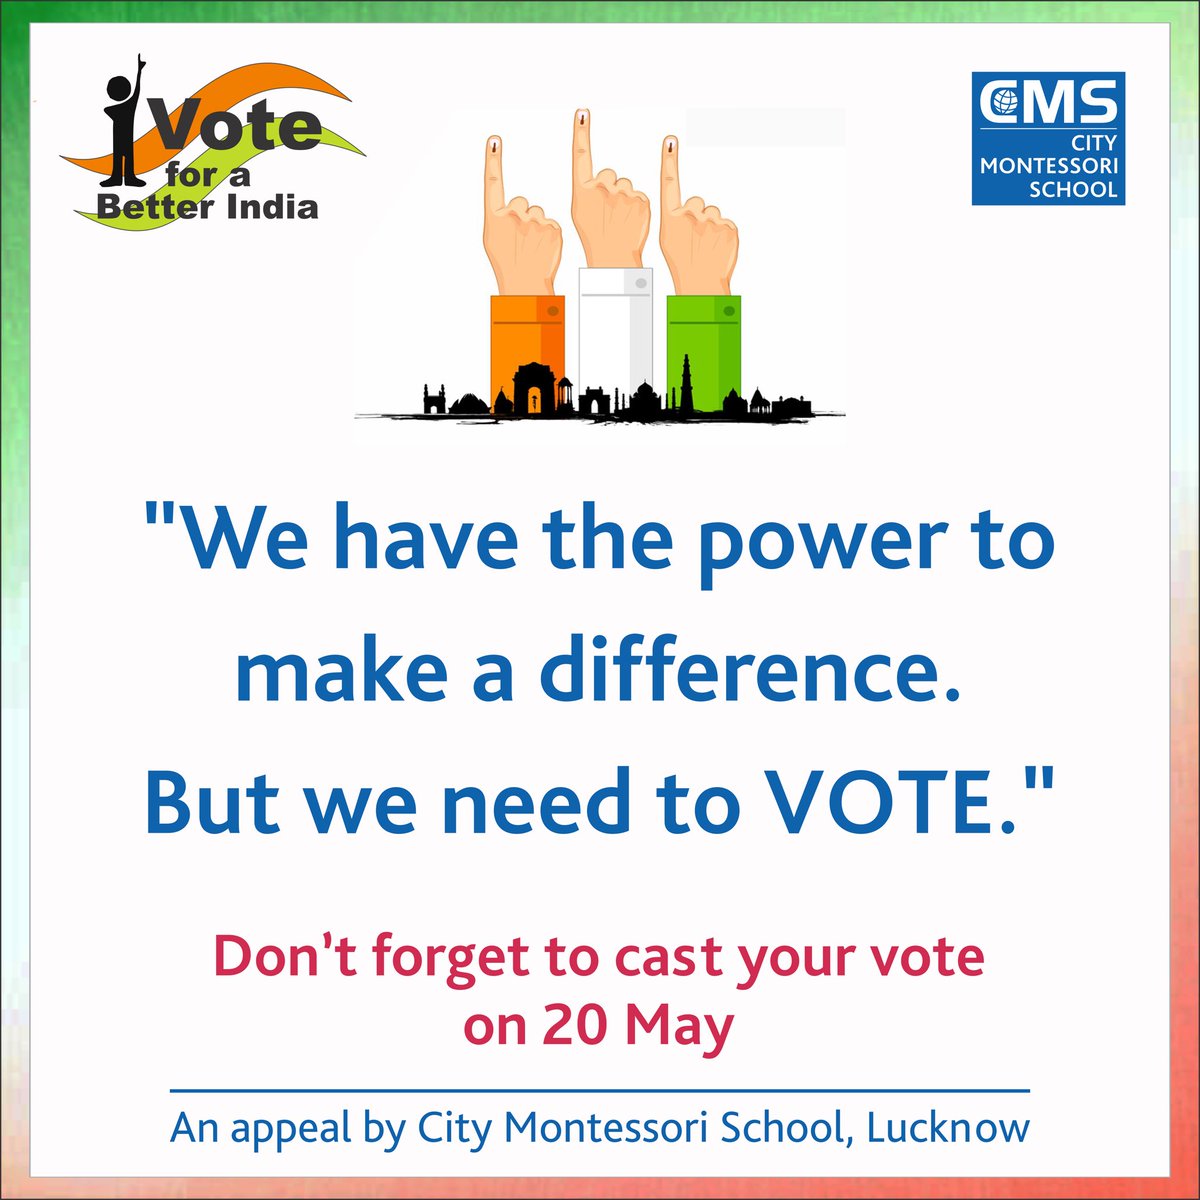 In this heat, our priority is good governance and it is upto us to choose in the greatest festival of democracy. 

Therefore CMS appeals to the citizens of Lucknow to come out and vote in large numbers.

#CMS #CMSeducation #CMSStudents  #InspiringLeaders
#castyoirvote